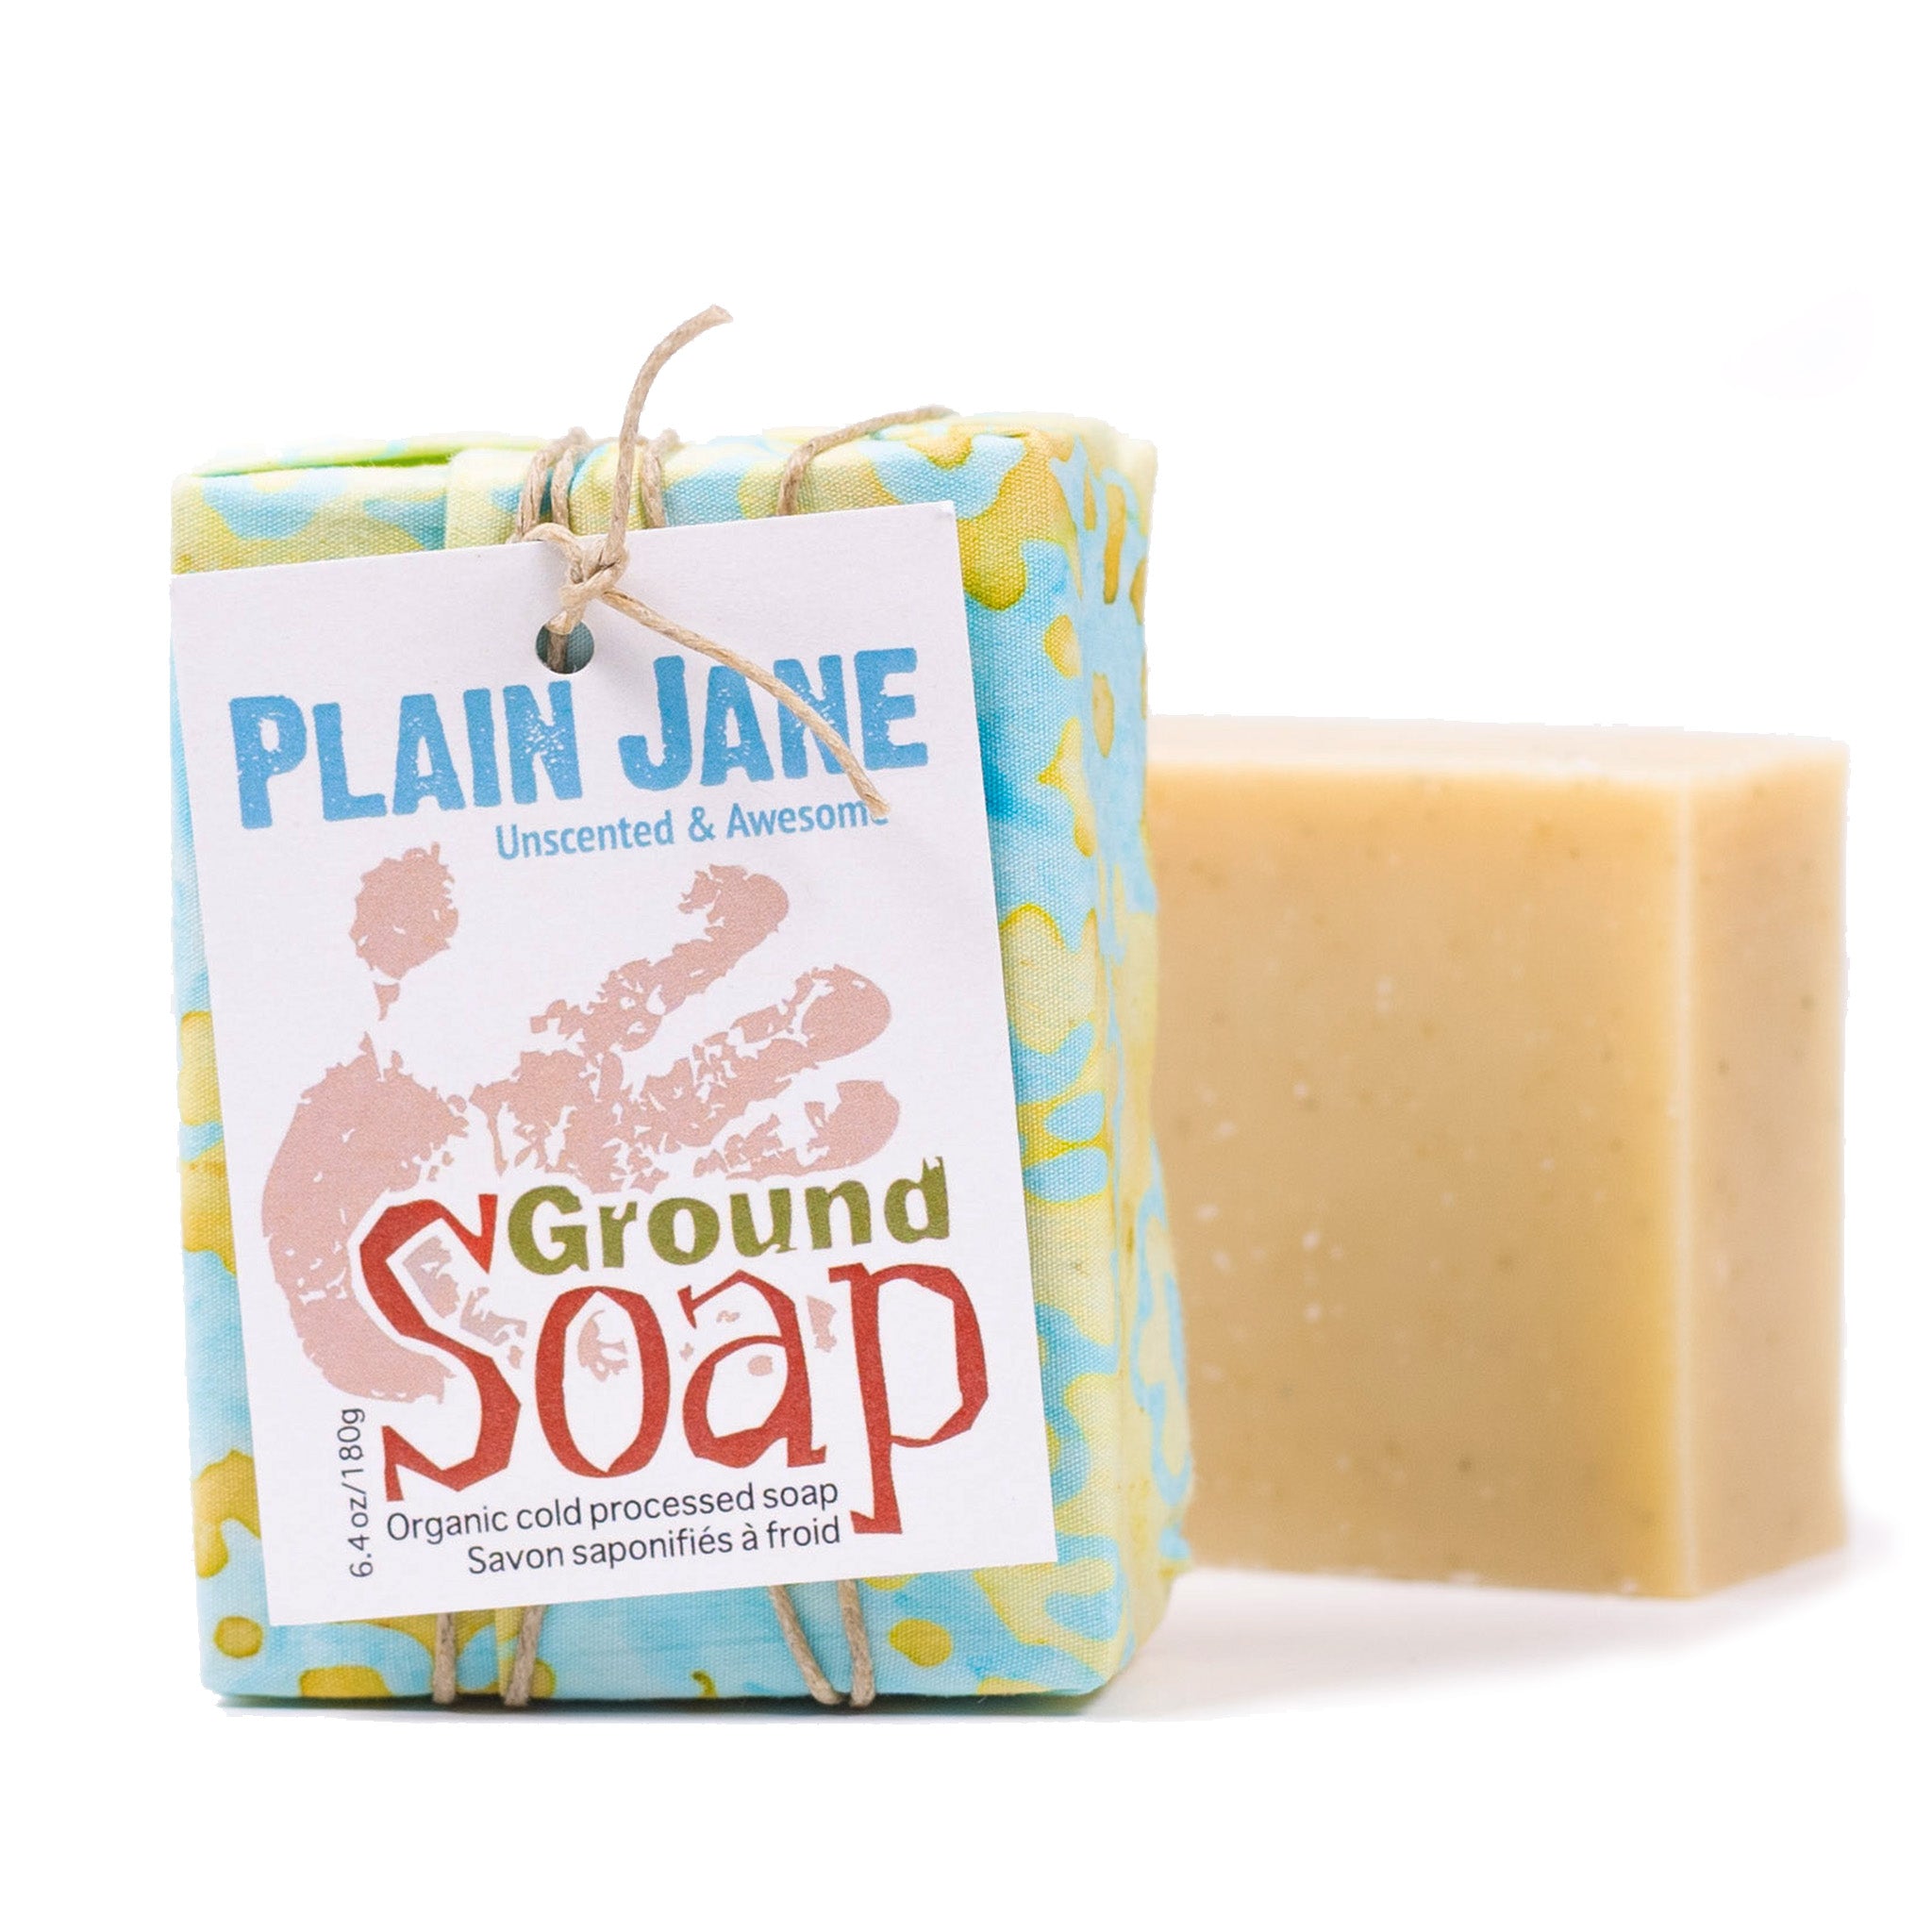 Plain Jane - Unscented and Awesome - Organic Cold Process Bar Soap